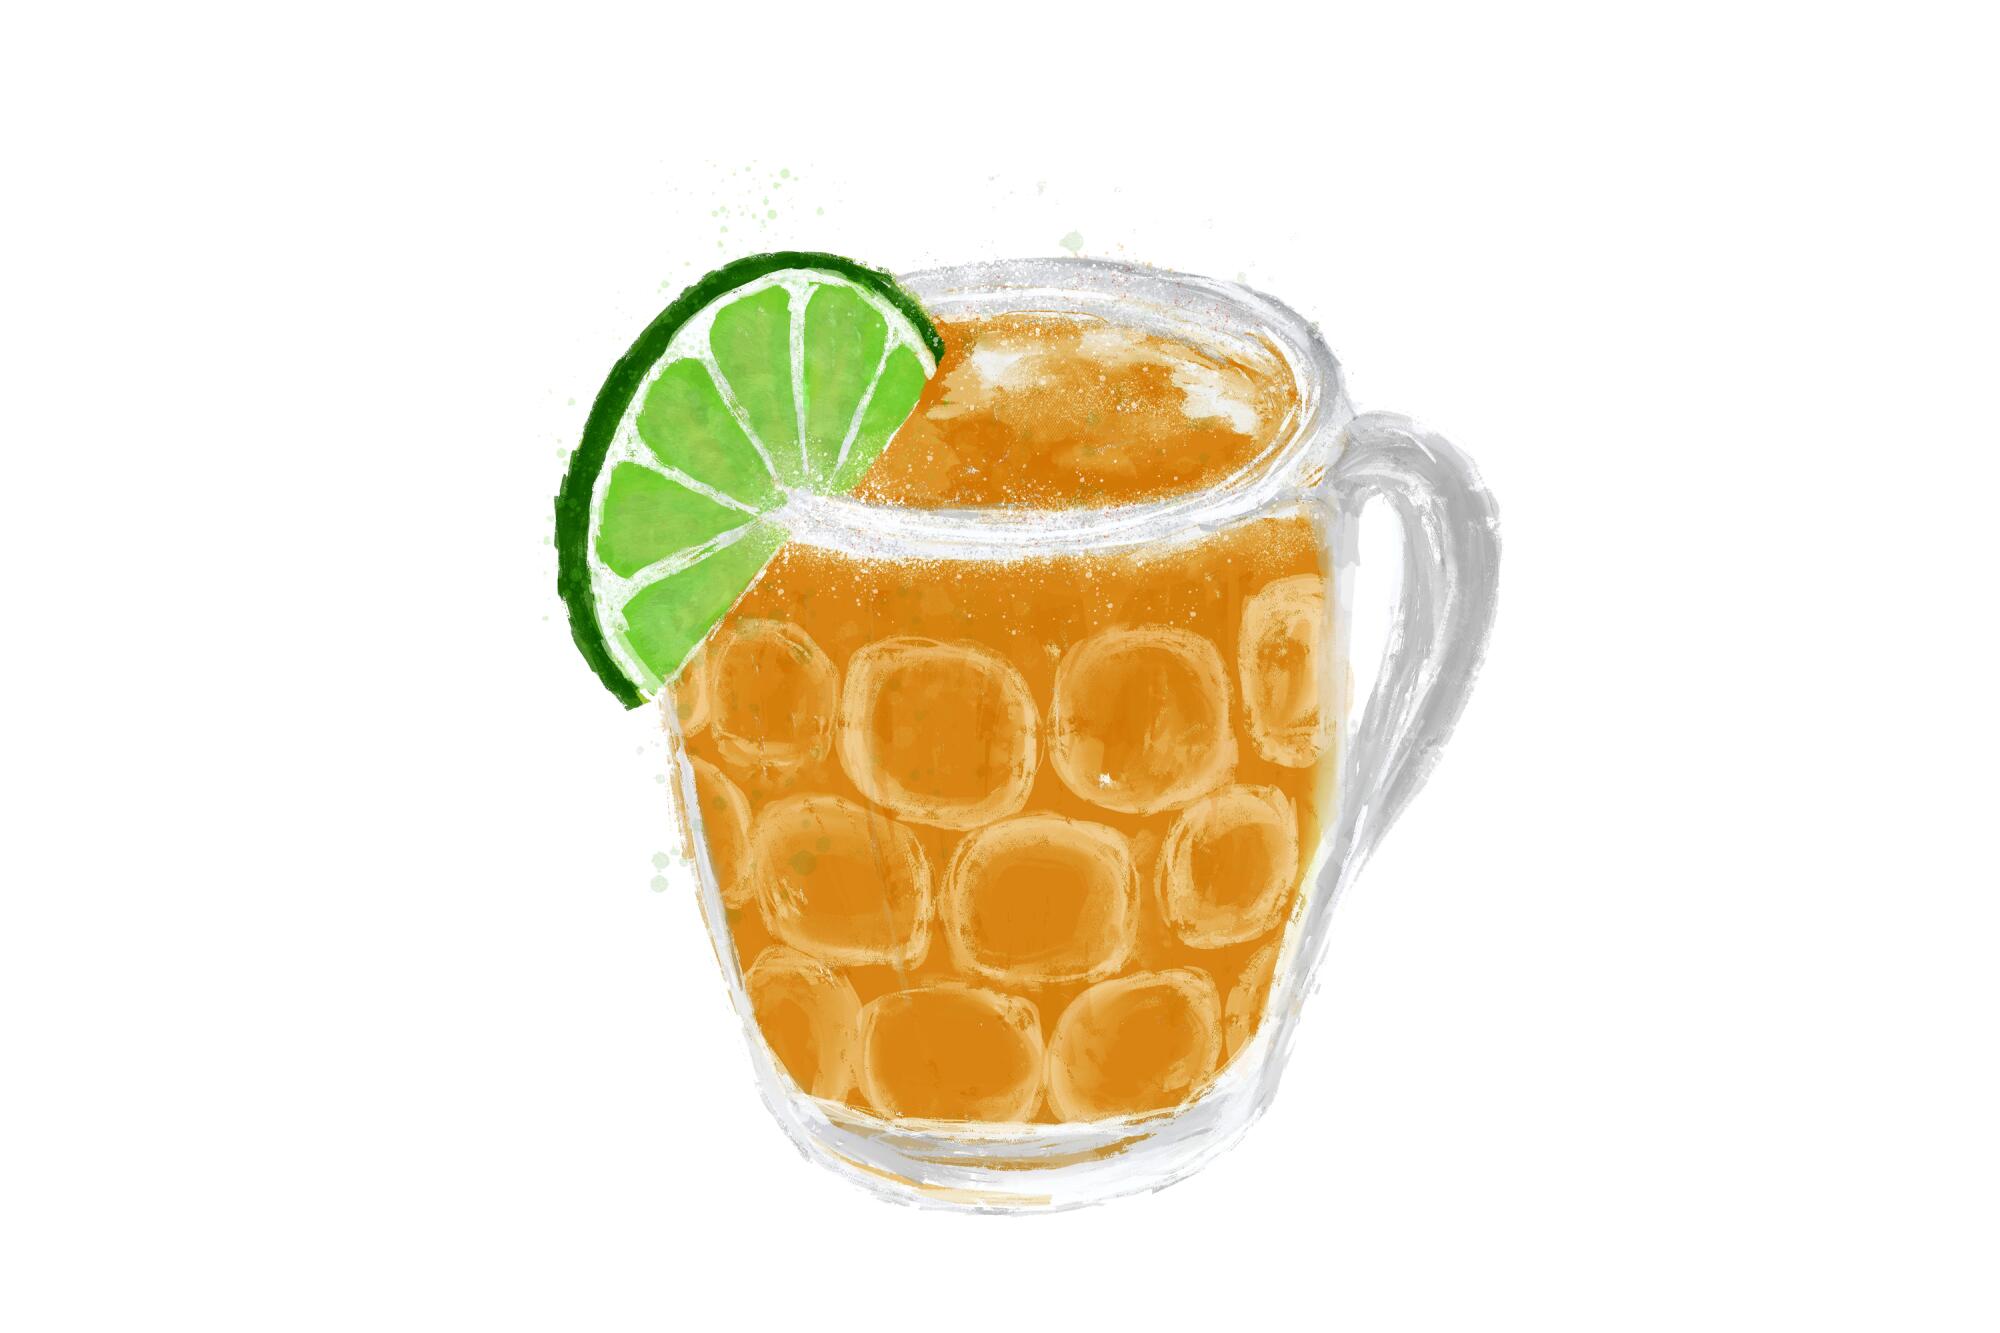 The chelada: Salt, lime, ice, lager. Served in a frosted mug with a salt rim.